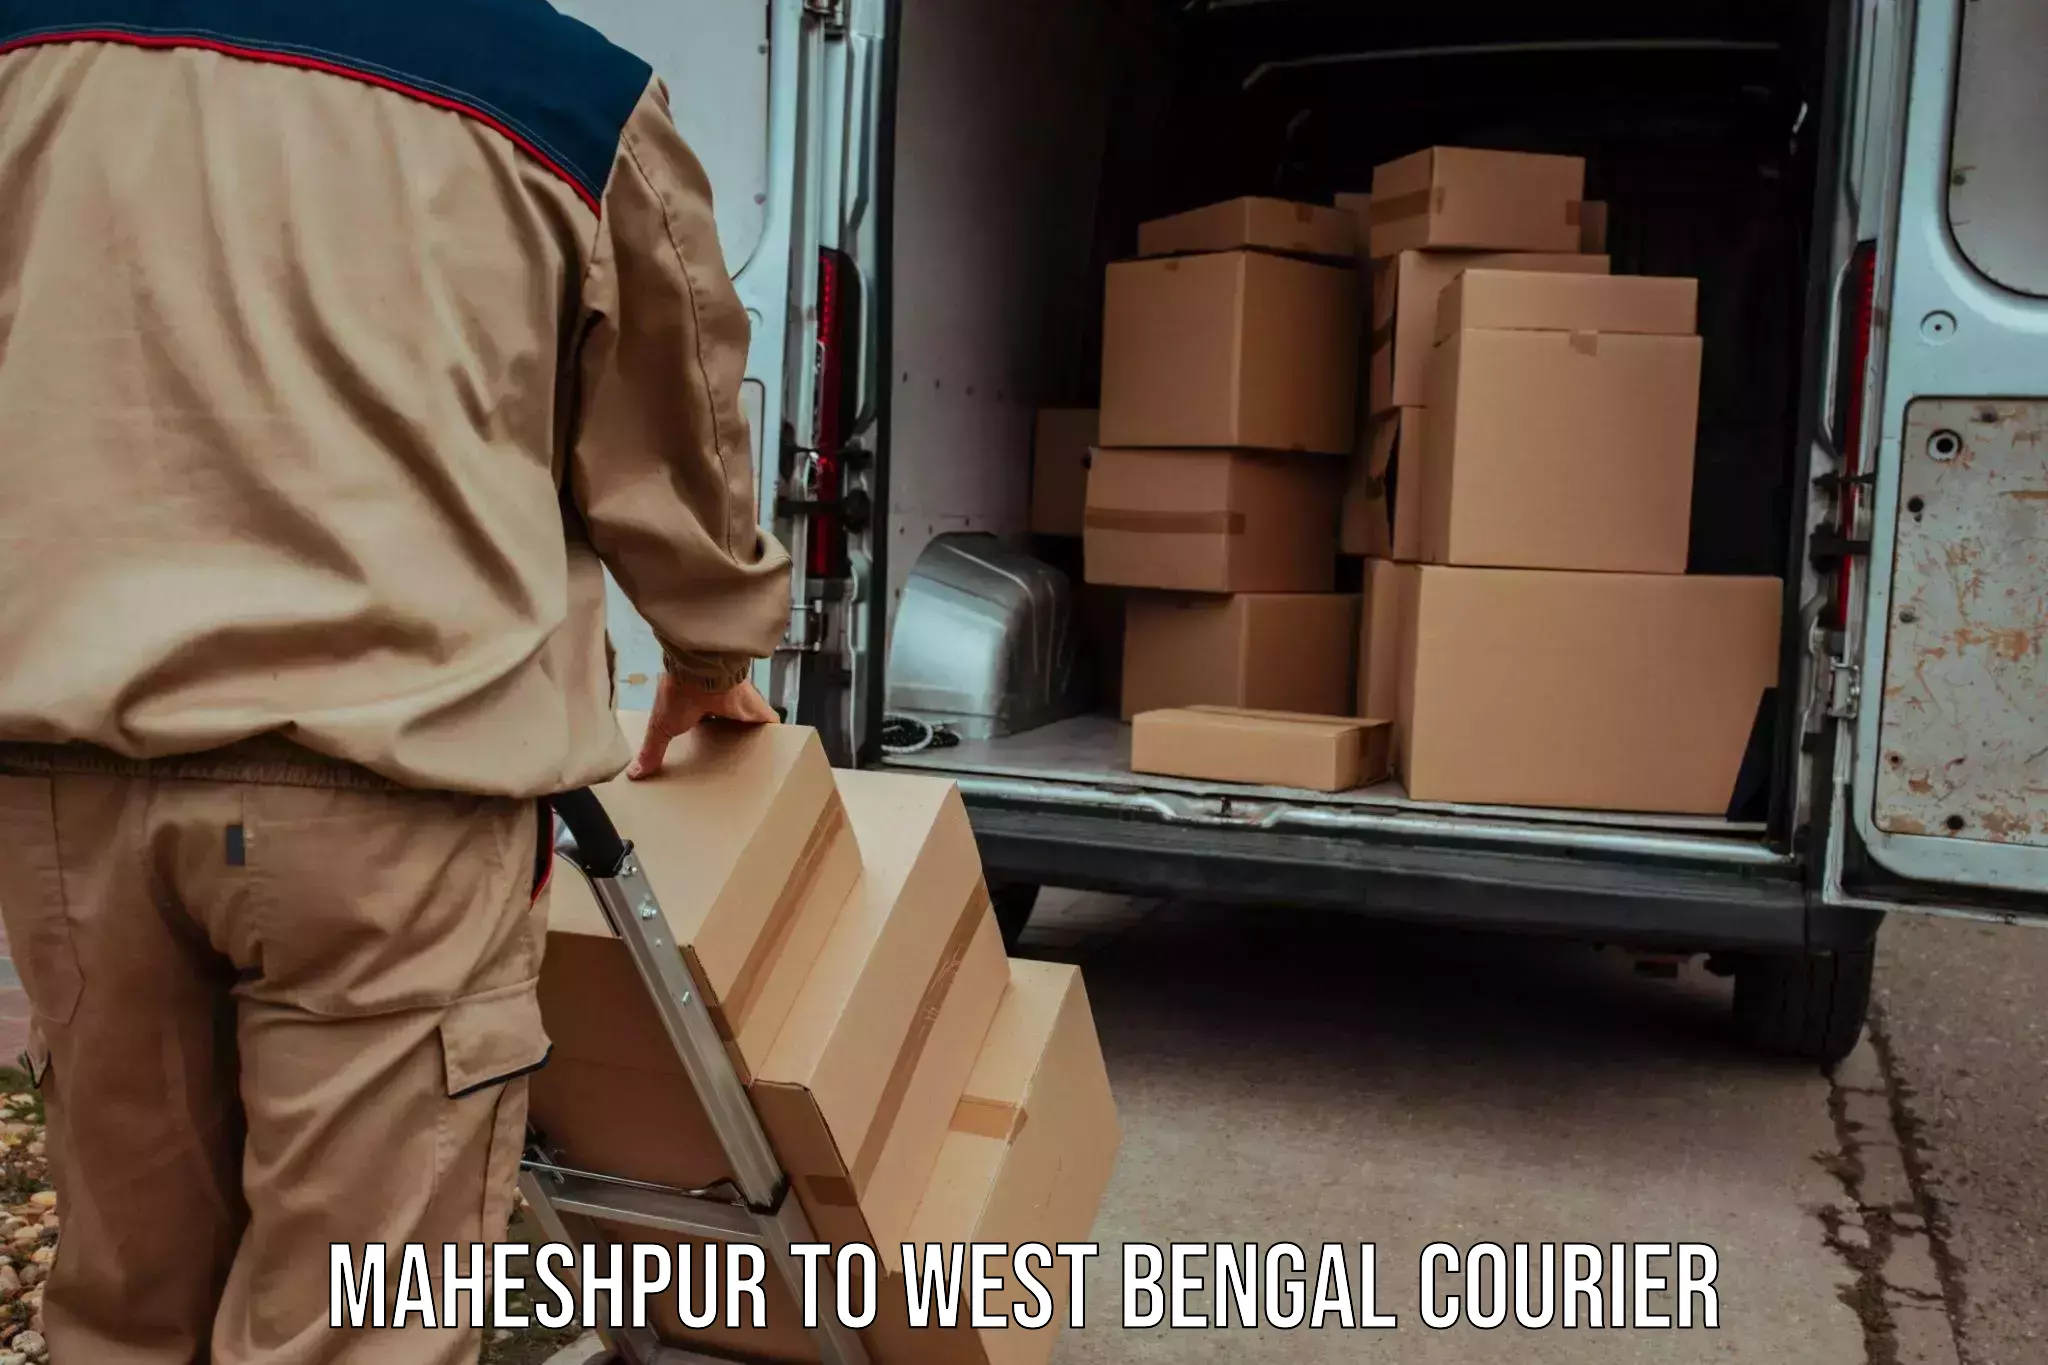 Global parcel delivery Maheshpur to Mirzapur Bardhaman